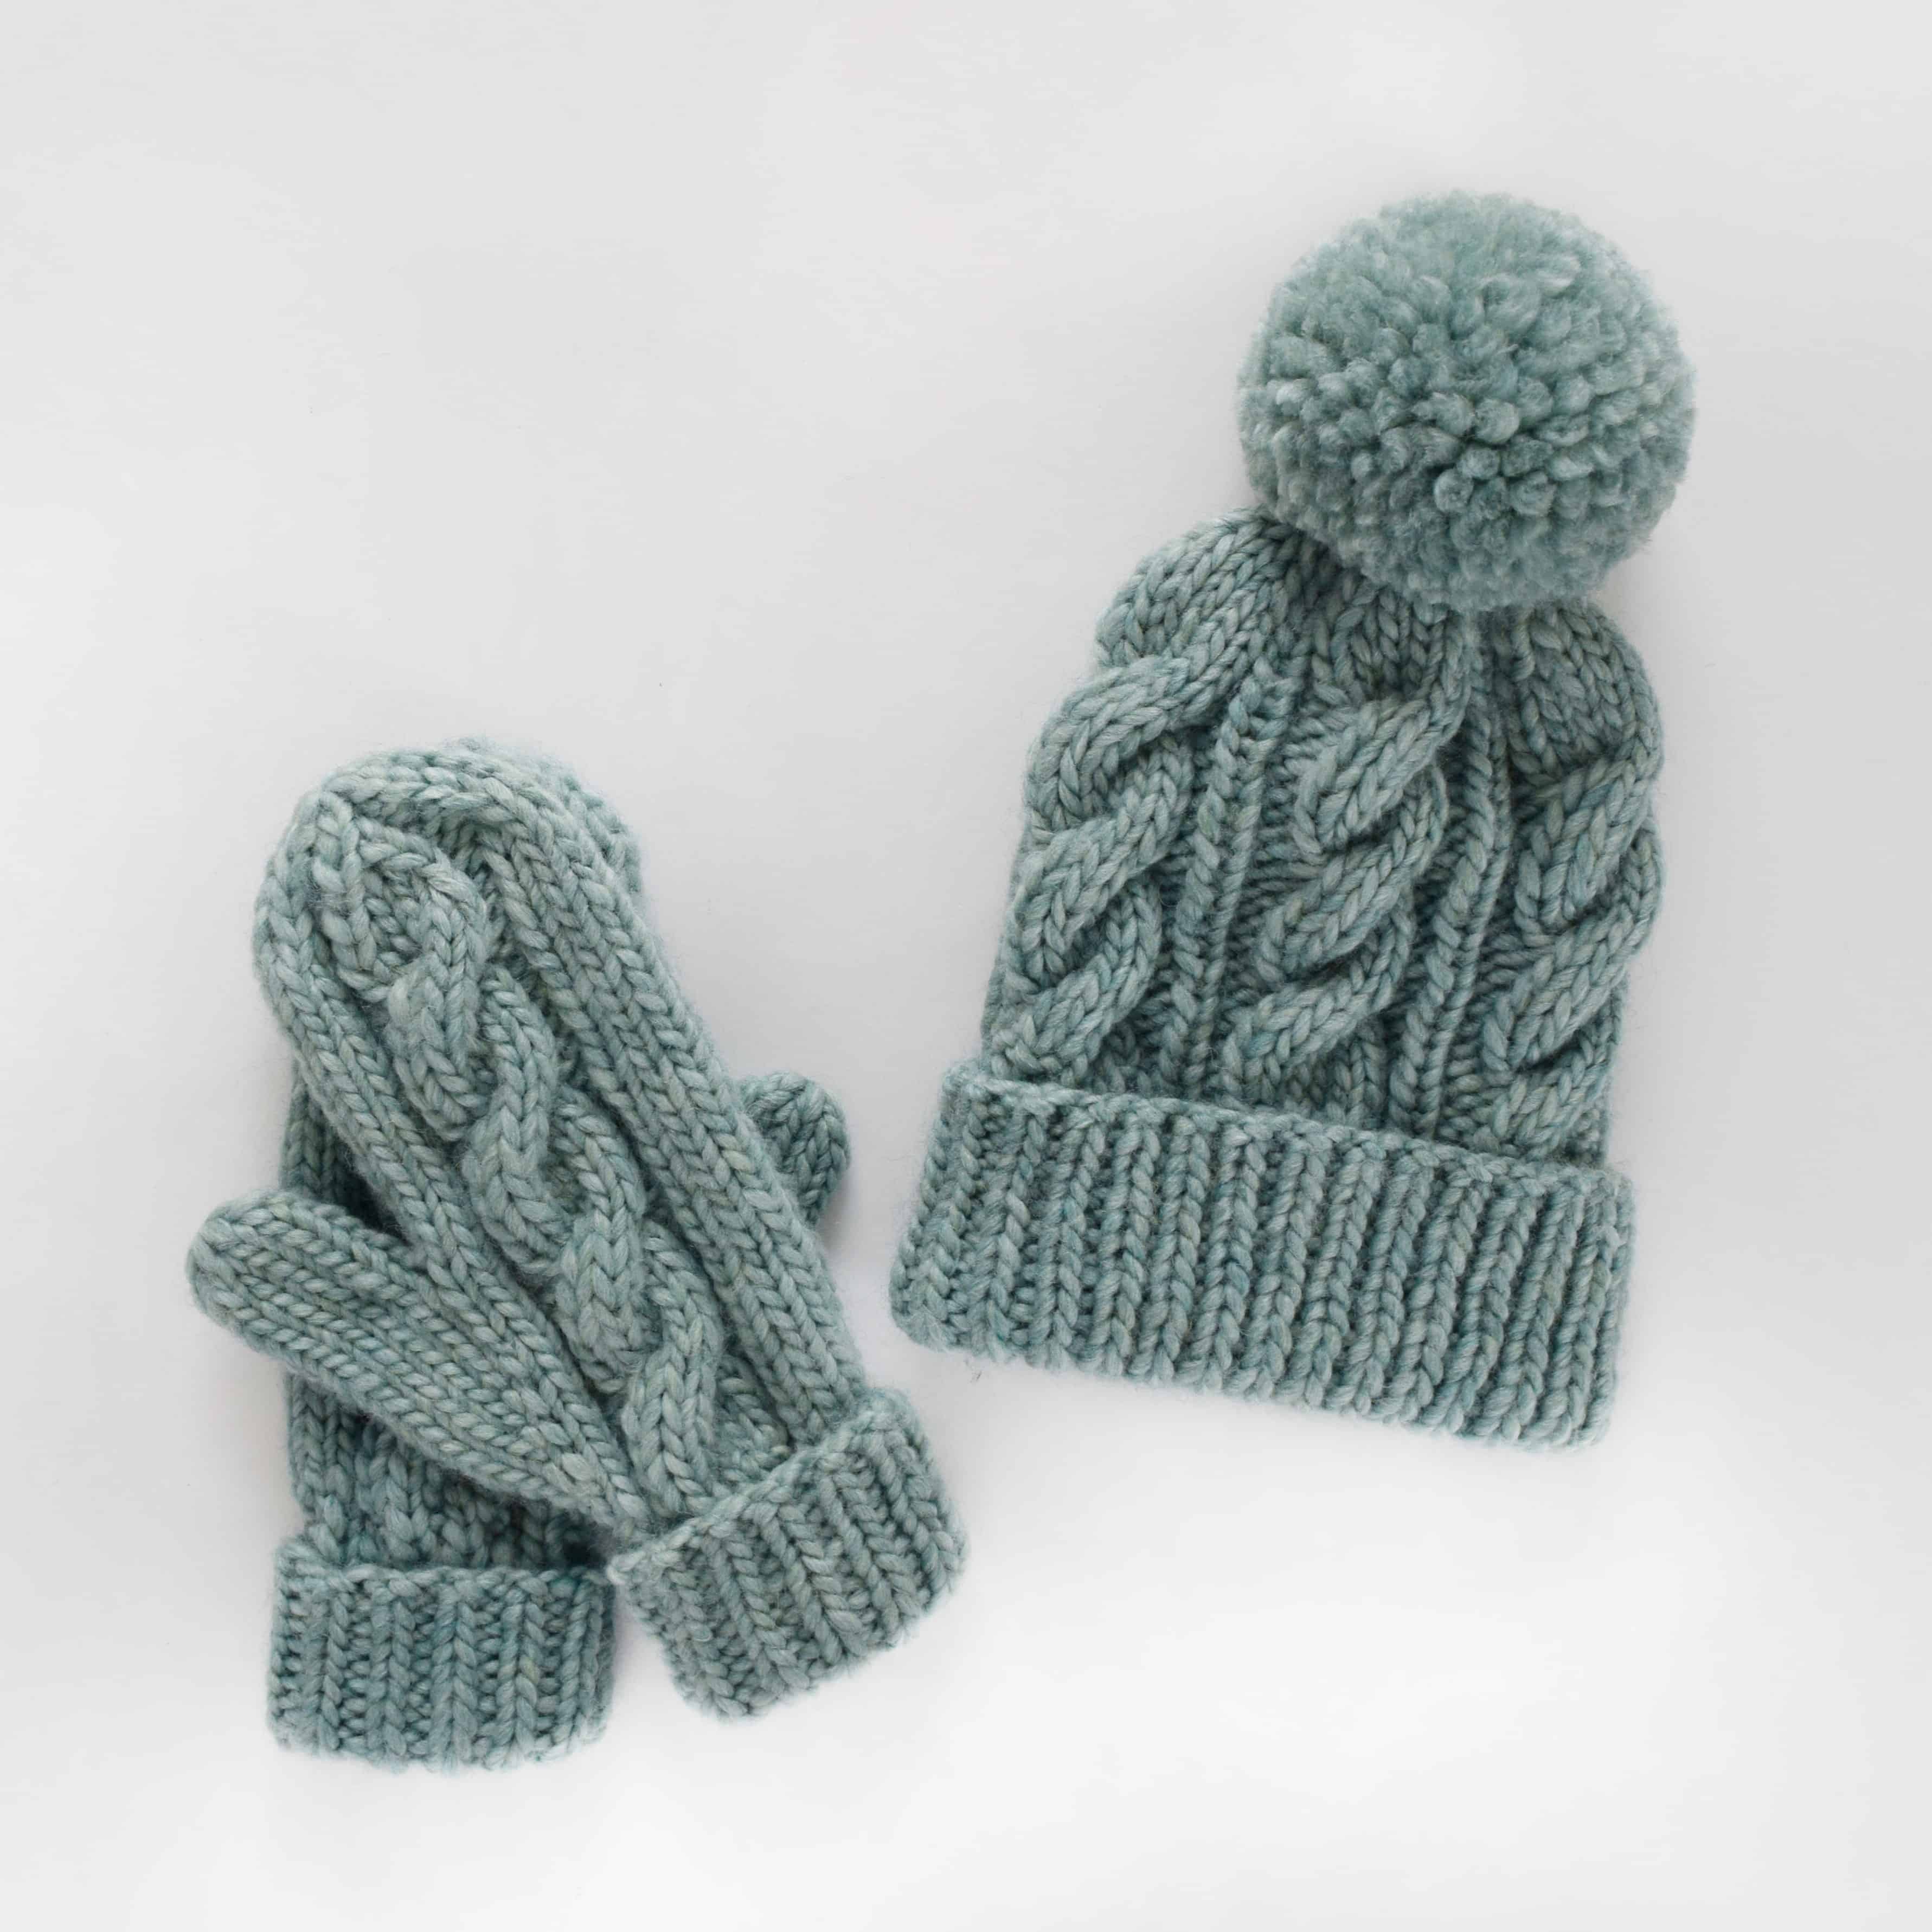 Classic Cabled Hat & Mittens - Free Pattern - Knifty Knittings